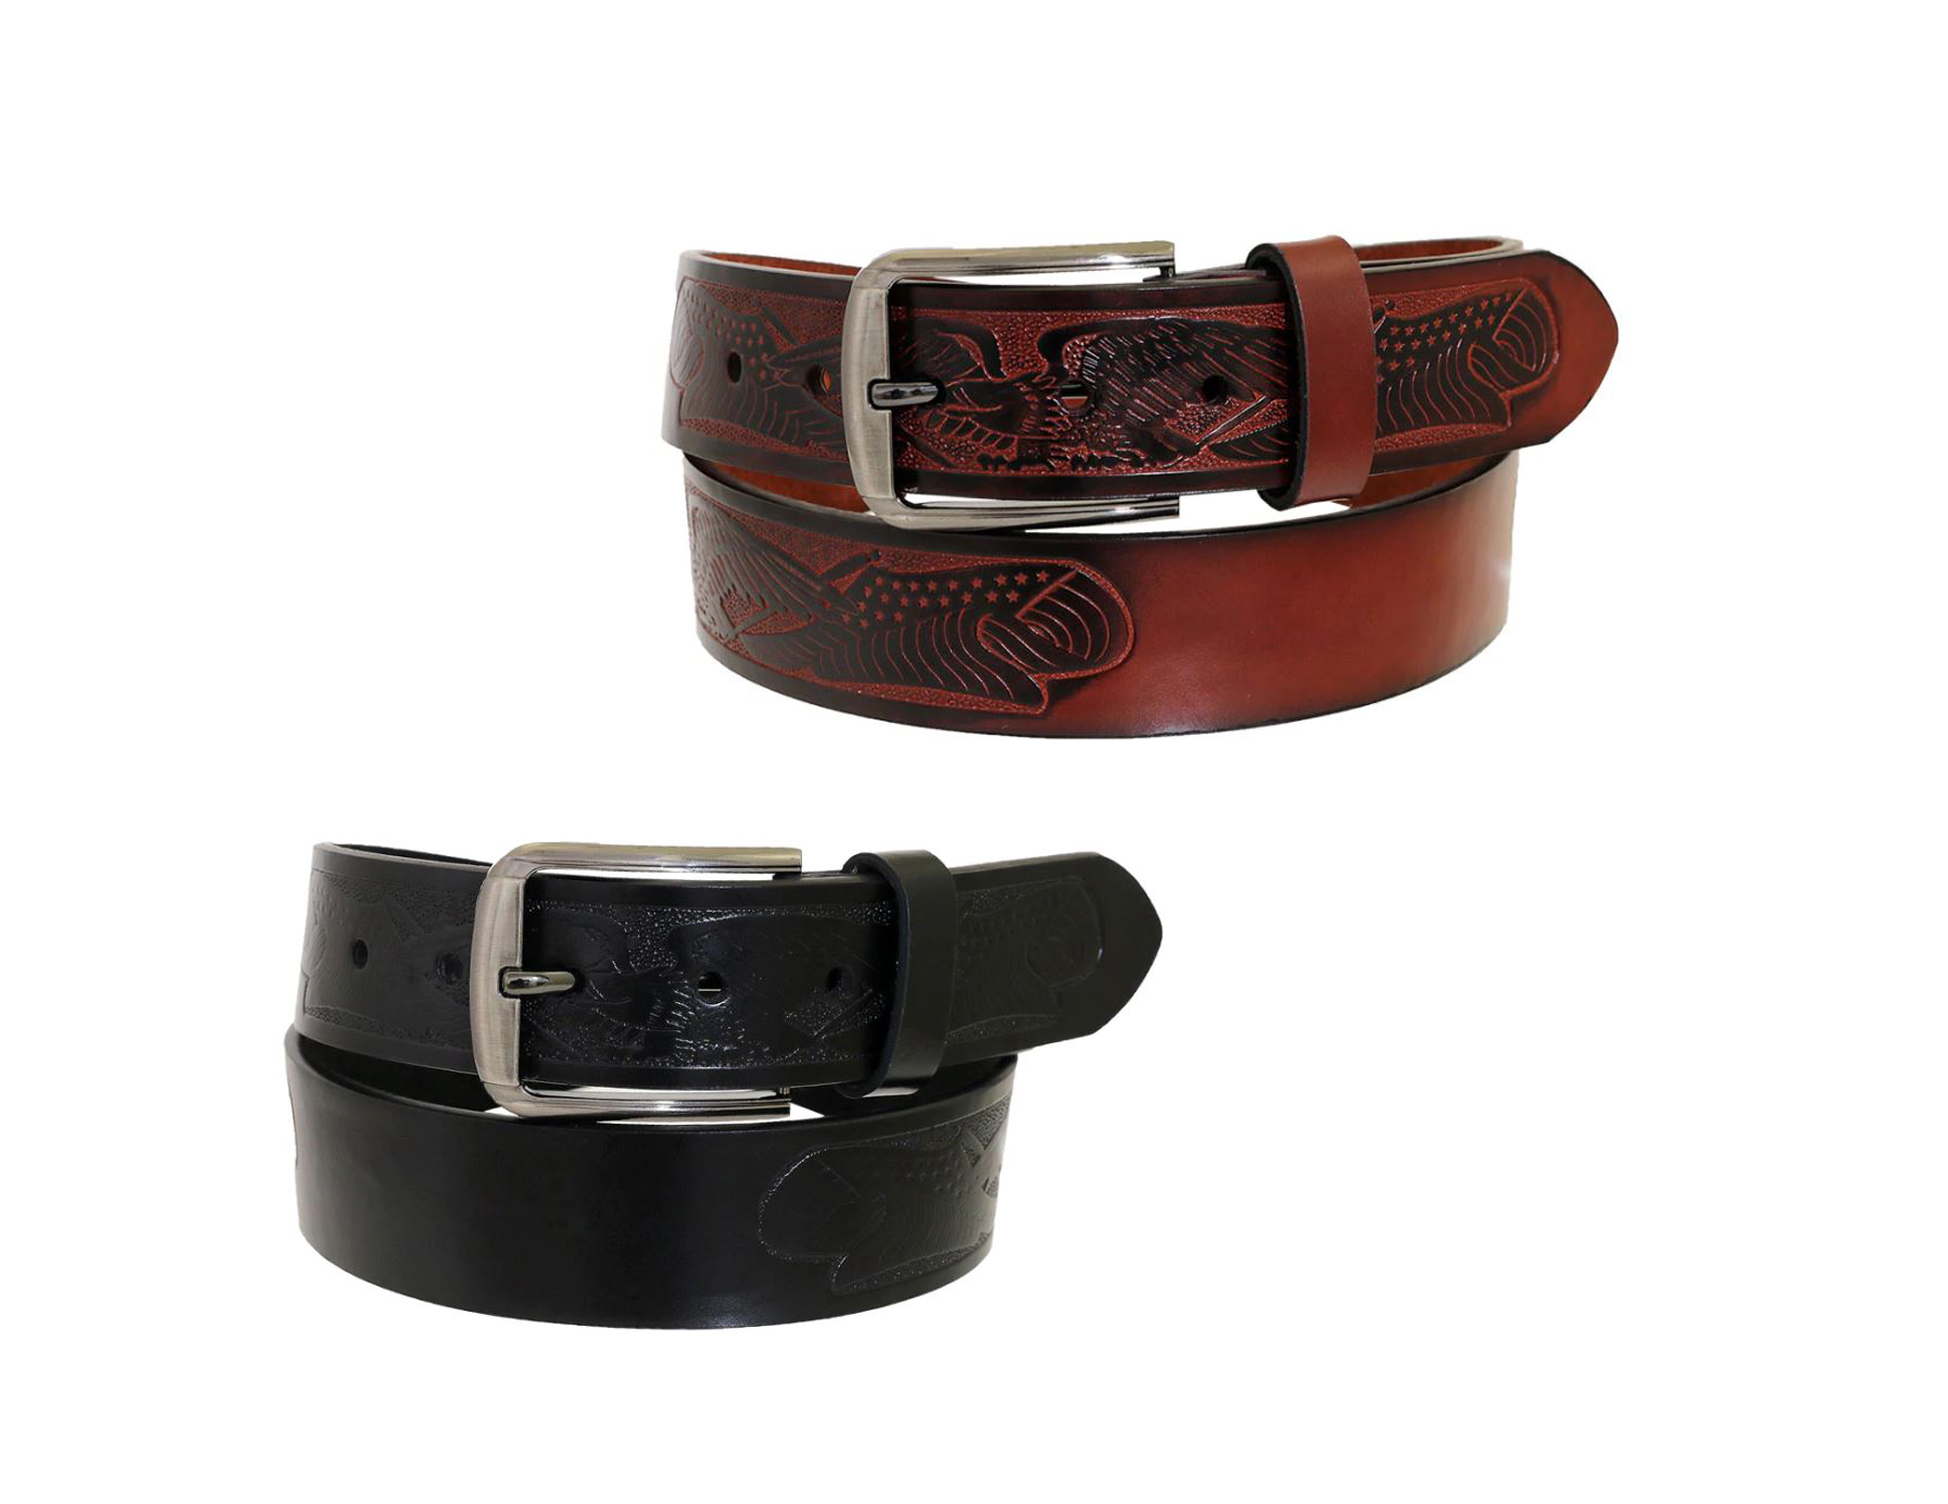 Men's Genuine LEATHER BELTs w/ Embroidered American Flag & Eagle - Choose Your Color(s) - Sizes 32-4